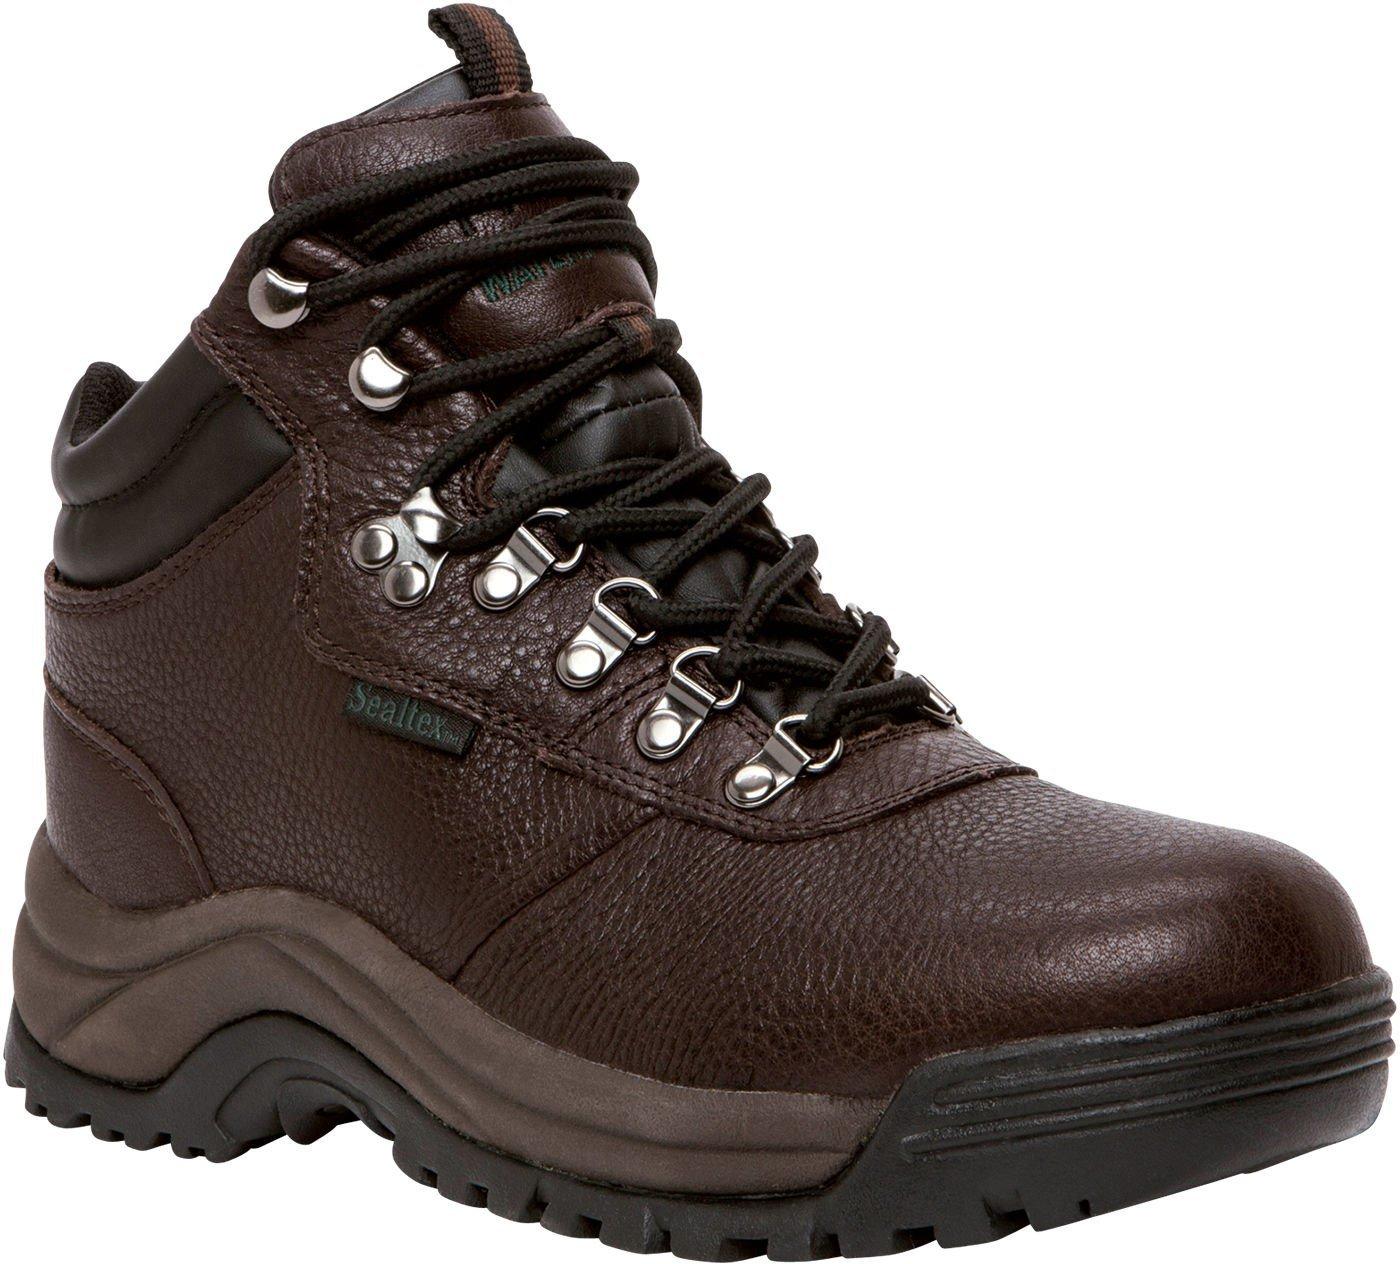 USA Mens Cliff Walker Lace Up Boots